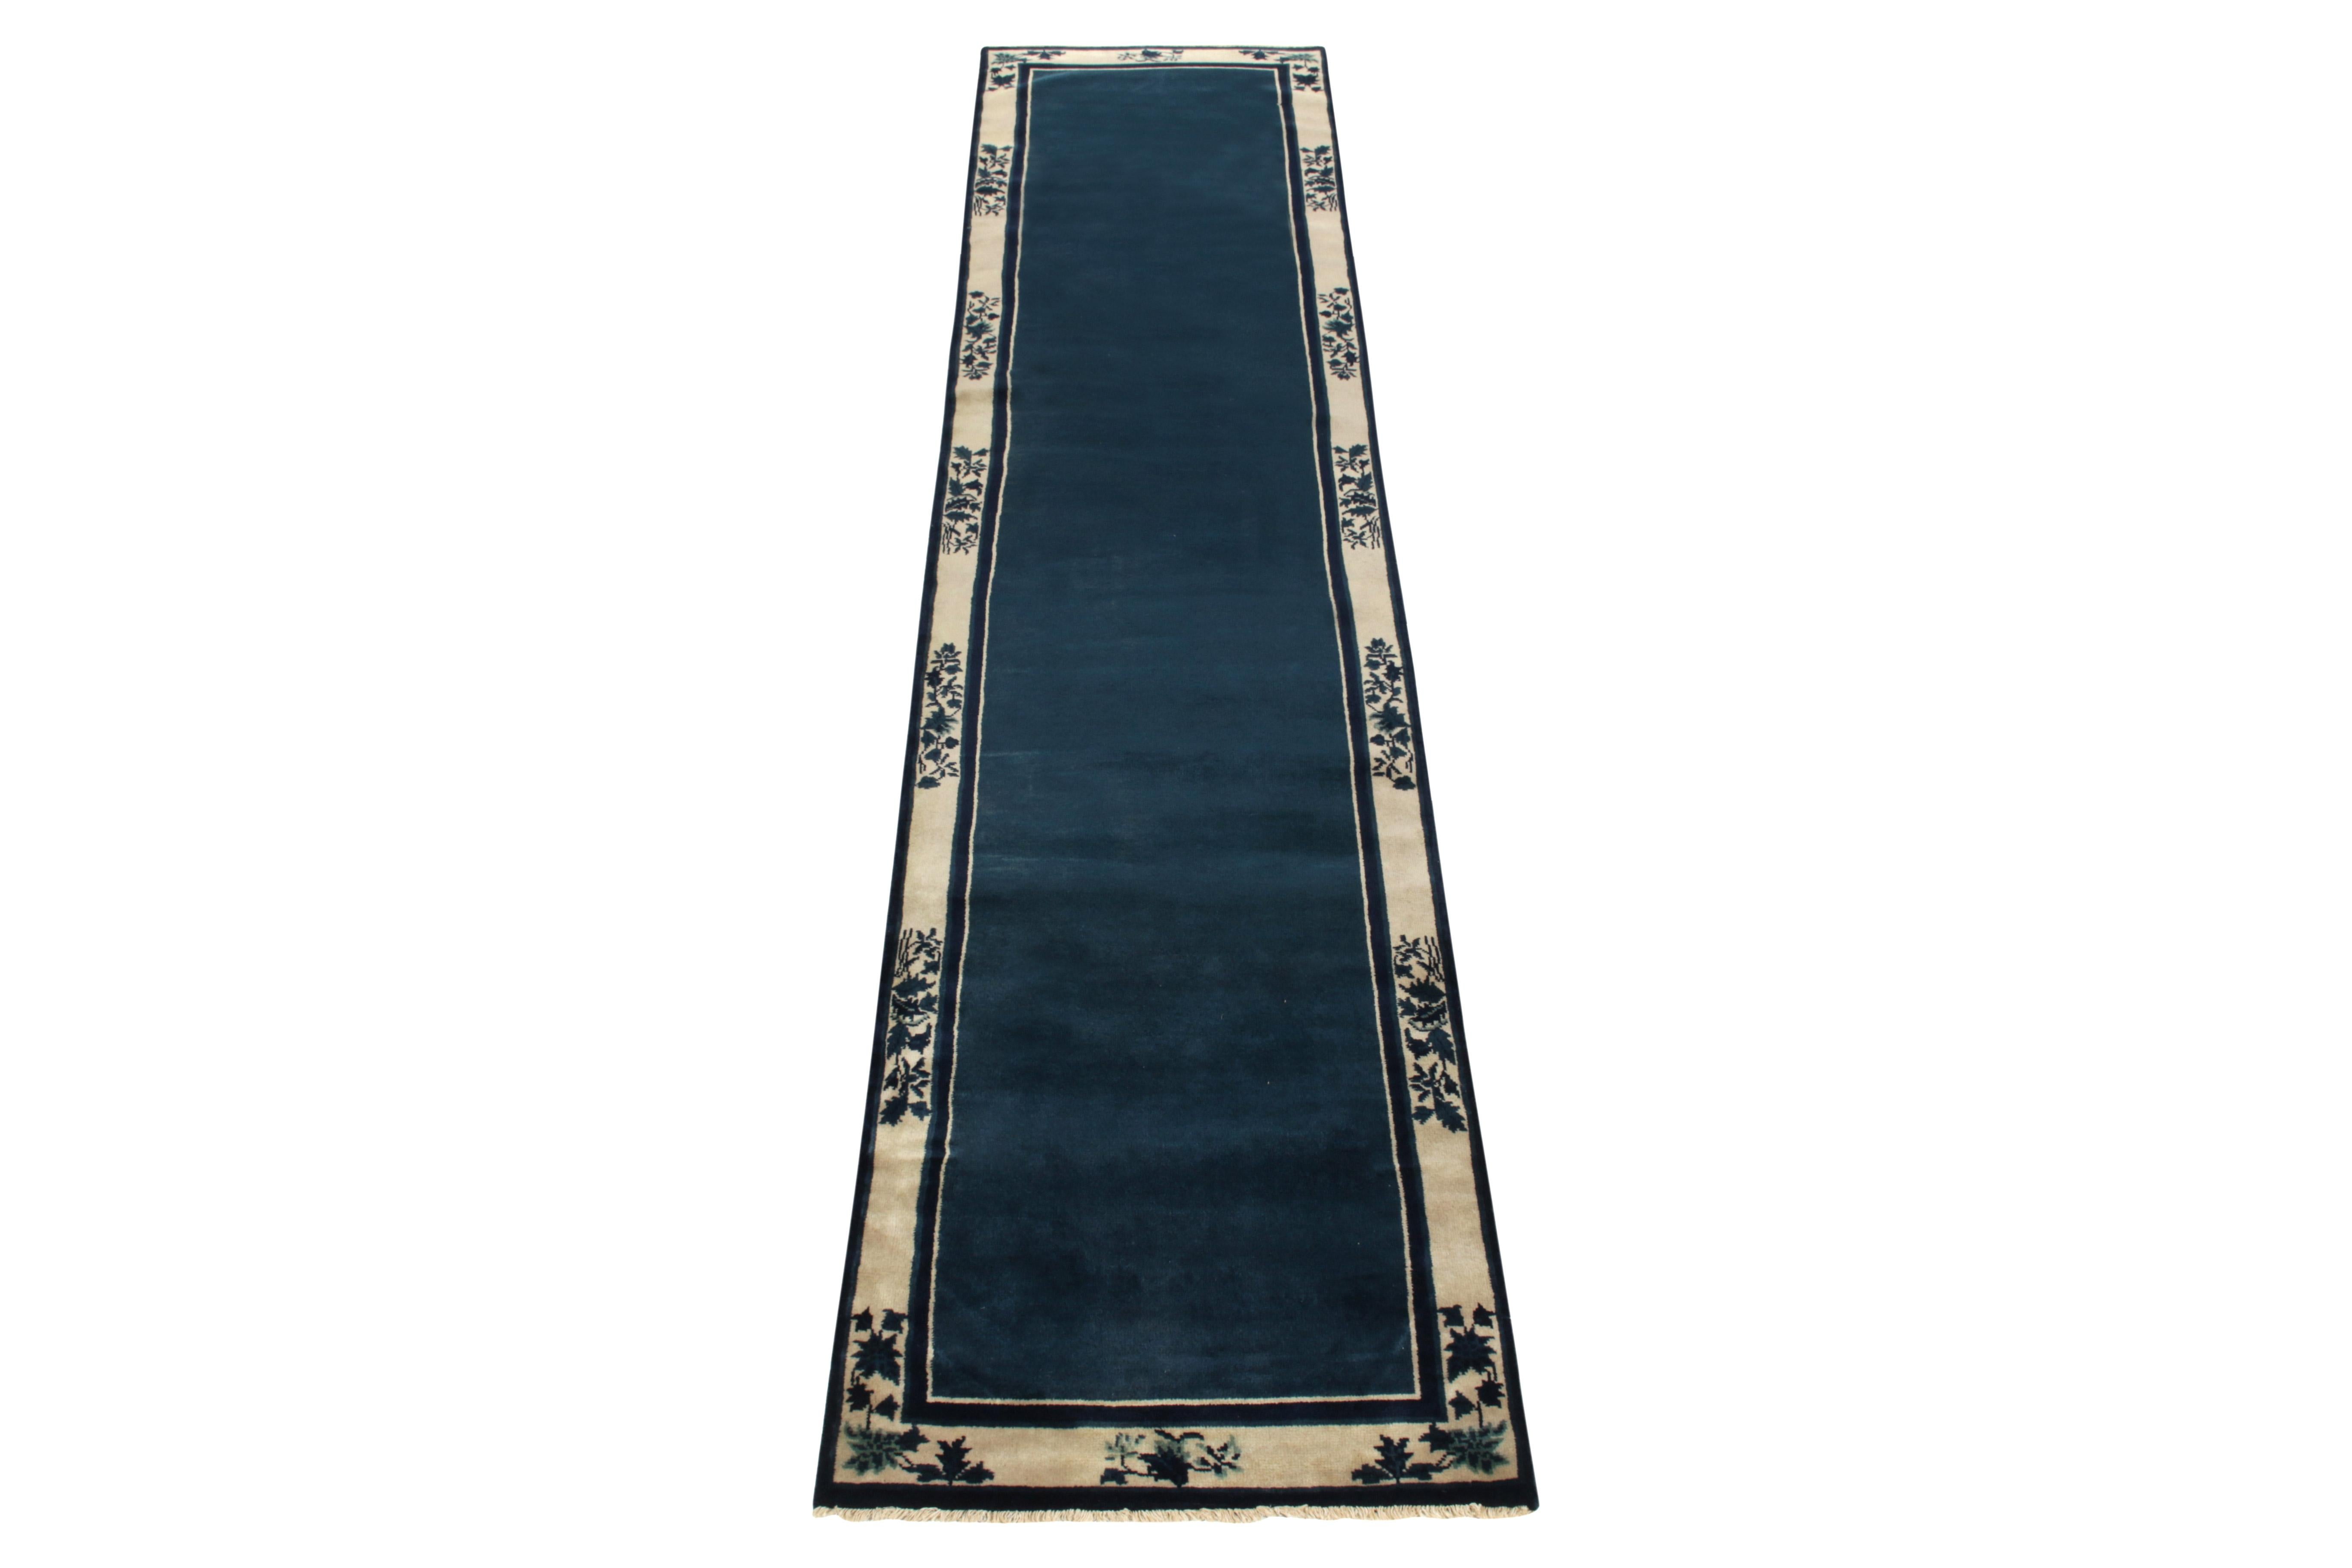 A 2x12 wool hand-knotted vintage runner connoting Chinese art deco sensibilities of the 1920s, from the newest line joining Rug & Kilim’s Antique & Vintage collection. The clean blue open field enjoys light dark spots for an interesting visual